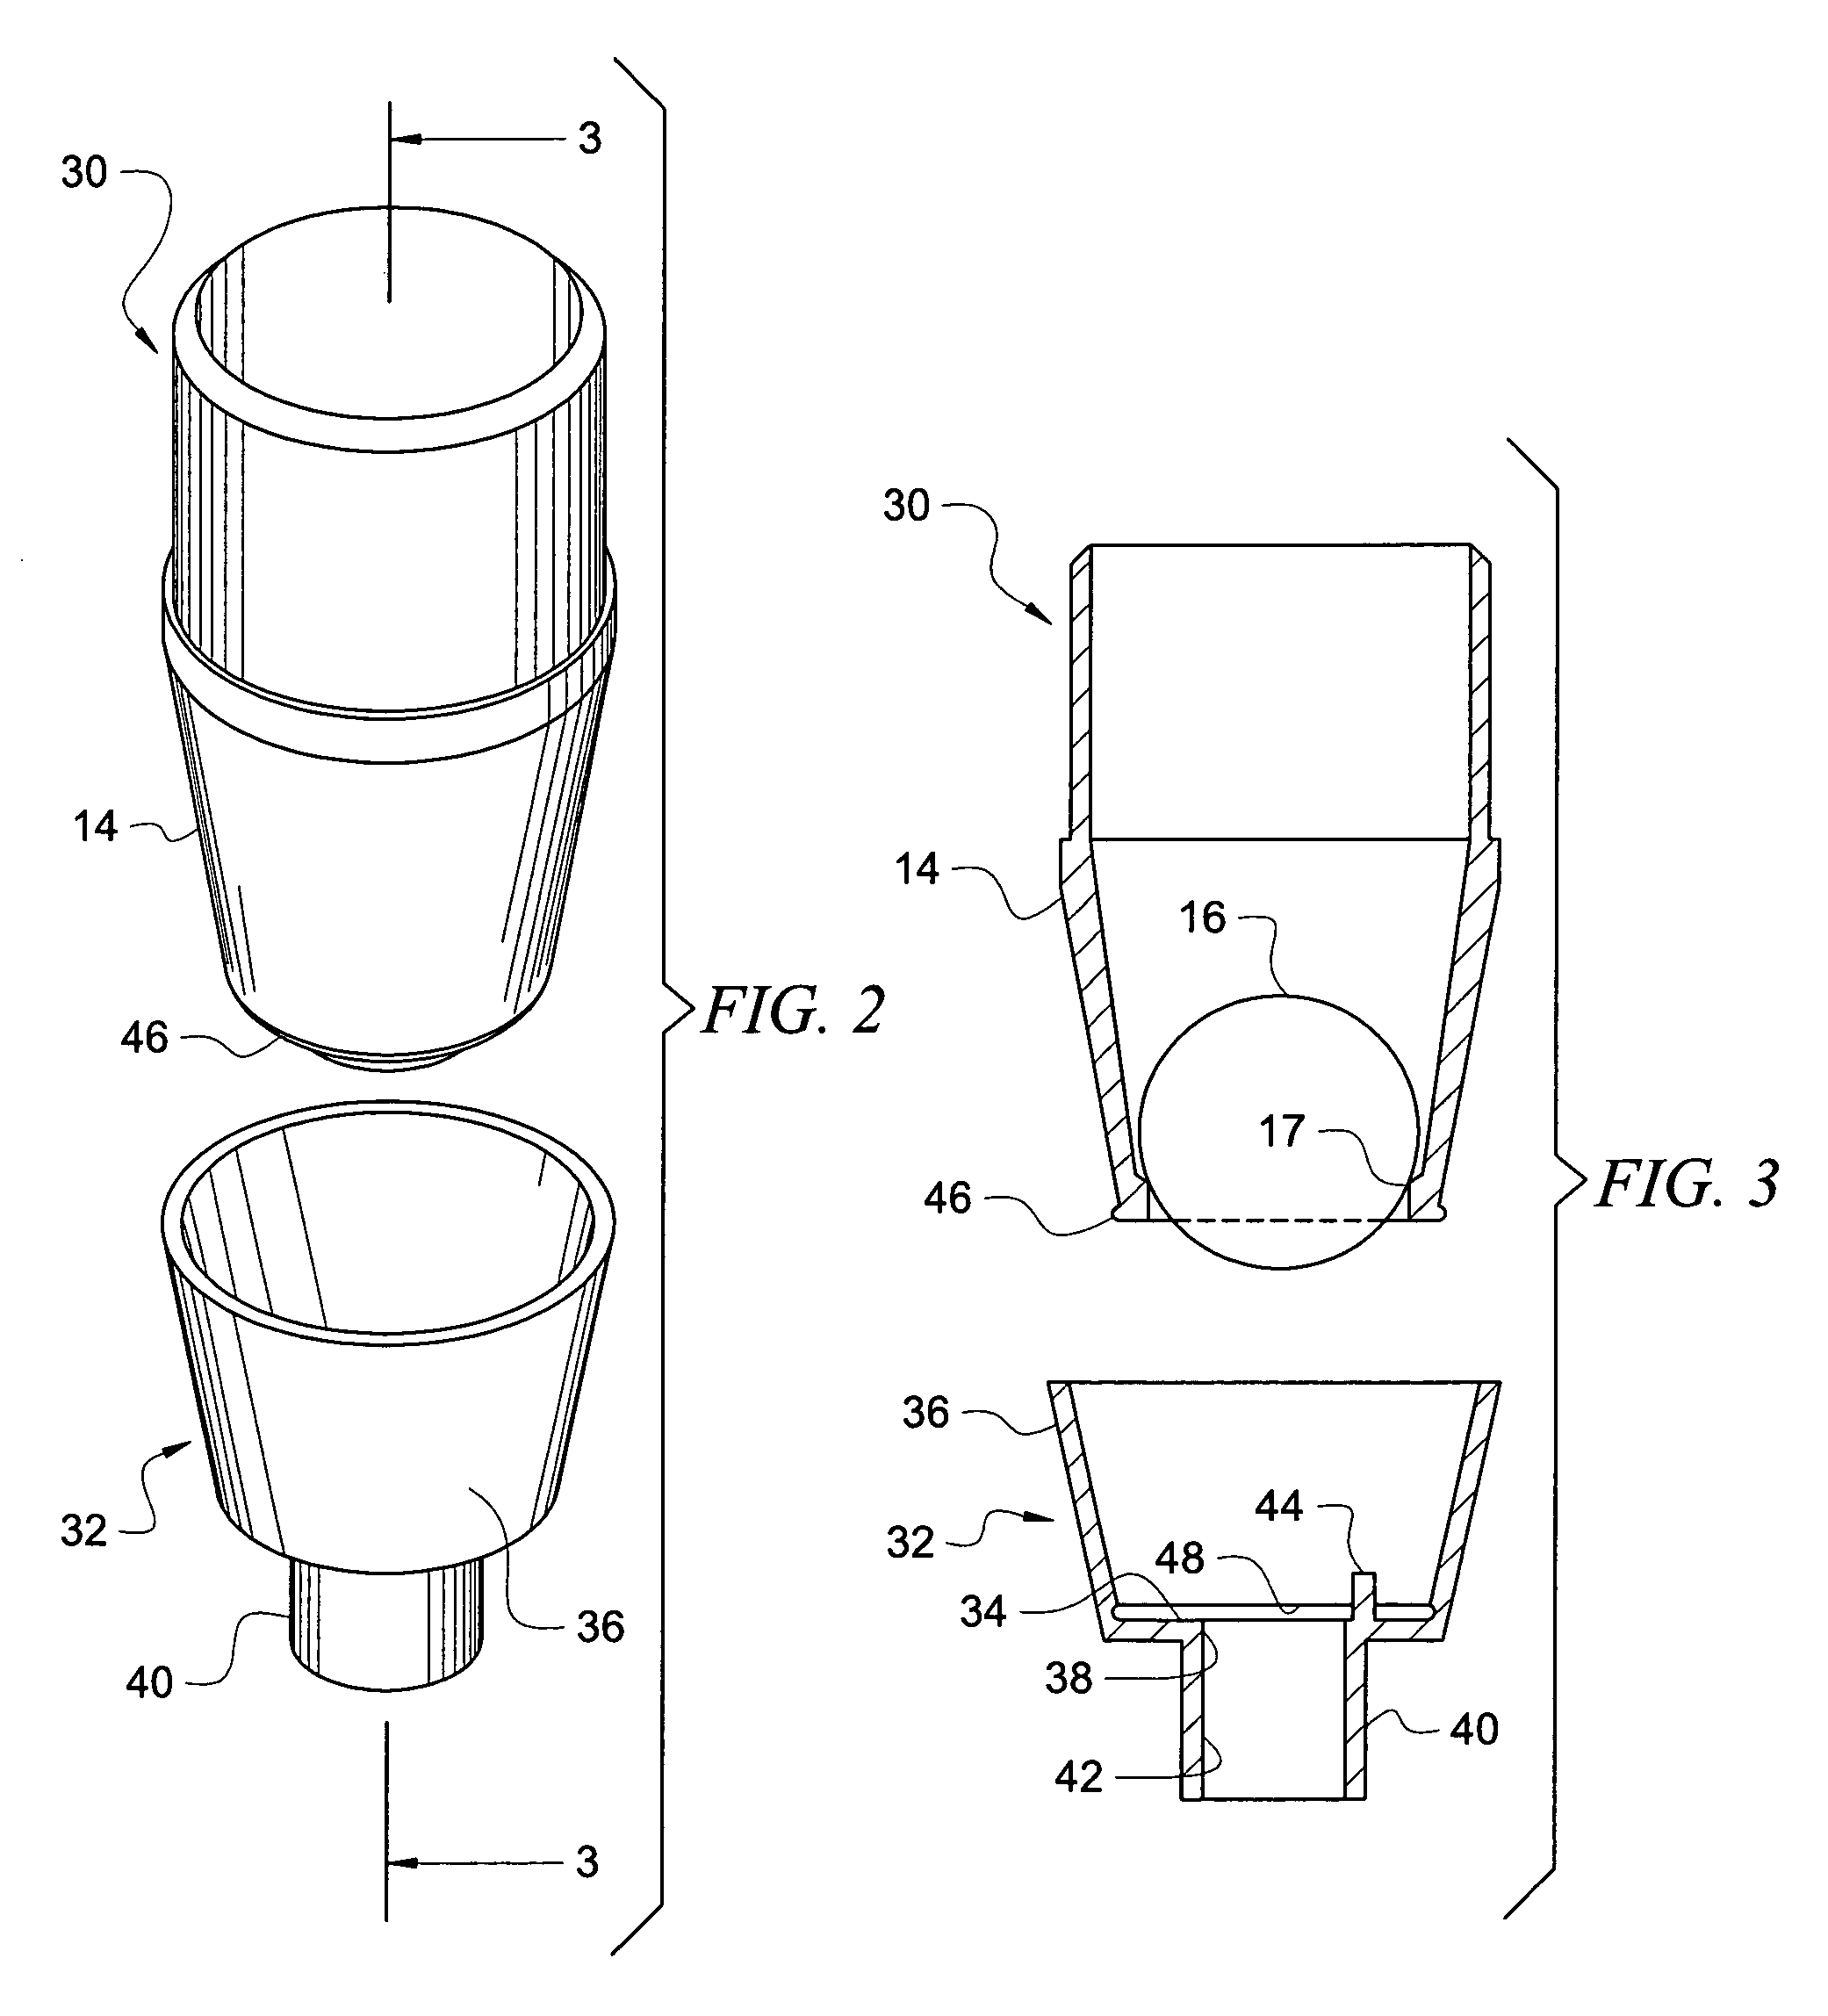 Bottom-emptying device for tapered bailer